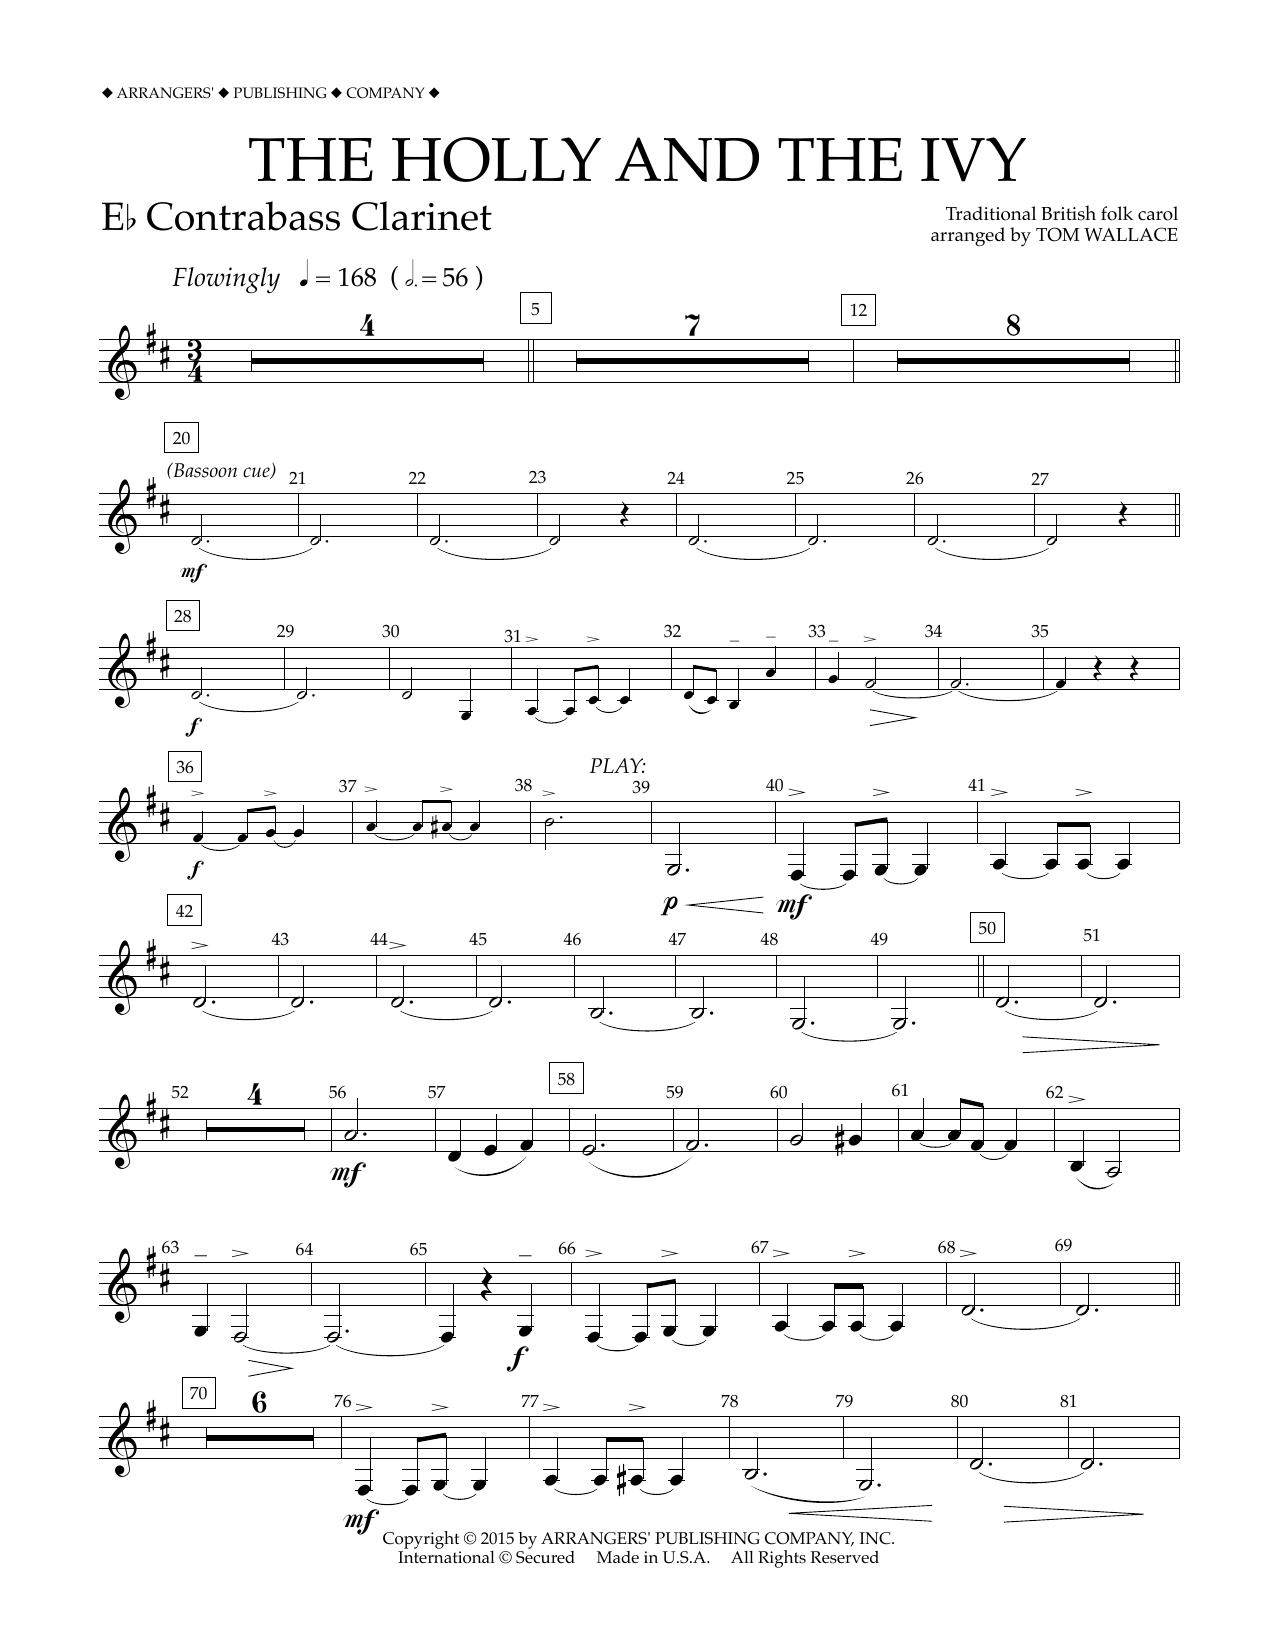 Download Tom Wallace The Holly and the Ivy - Eb Contra Bass Sheet Music